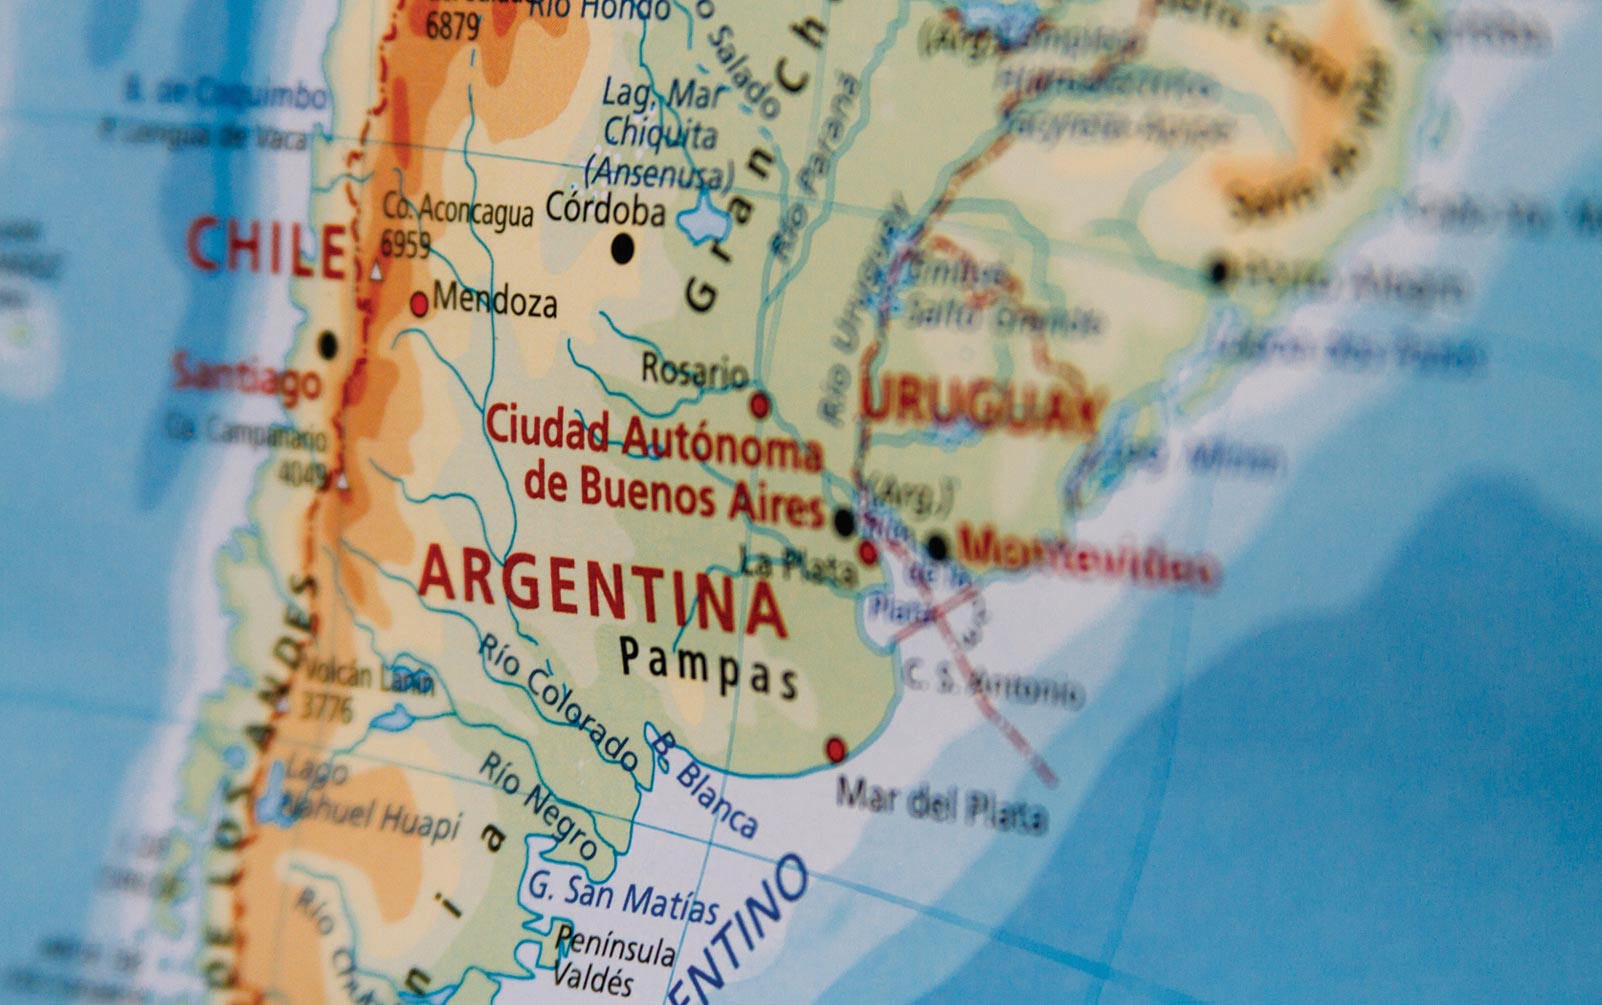 Scientific Highlights from the IASLC Latin America Conference on Lung Cancer